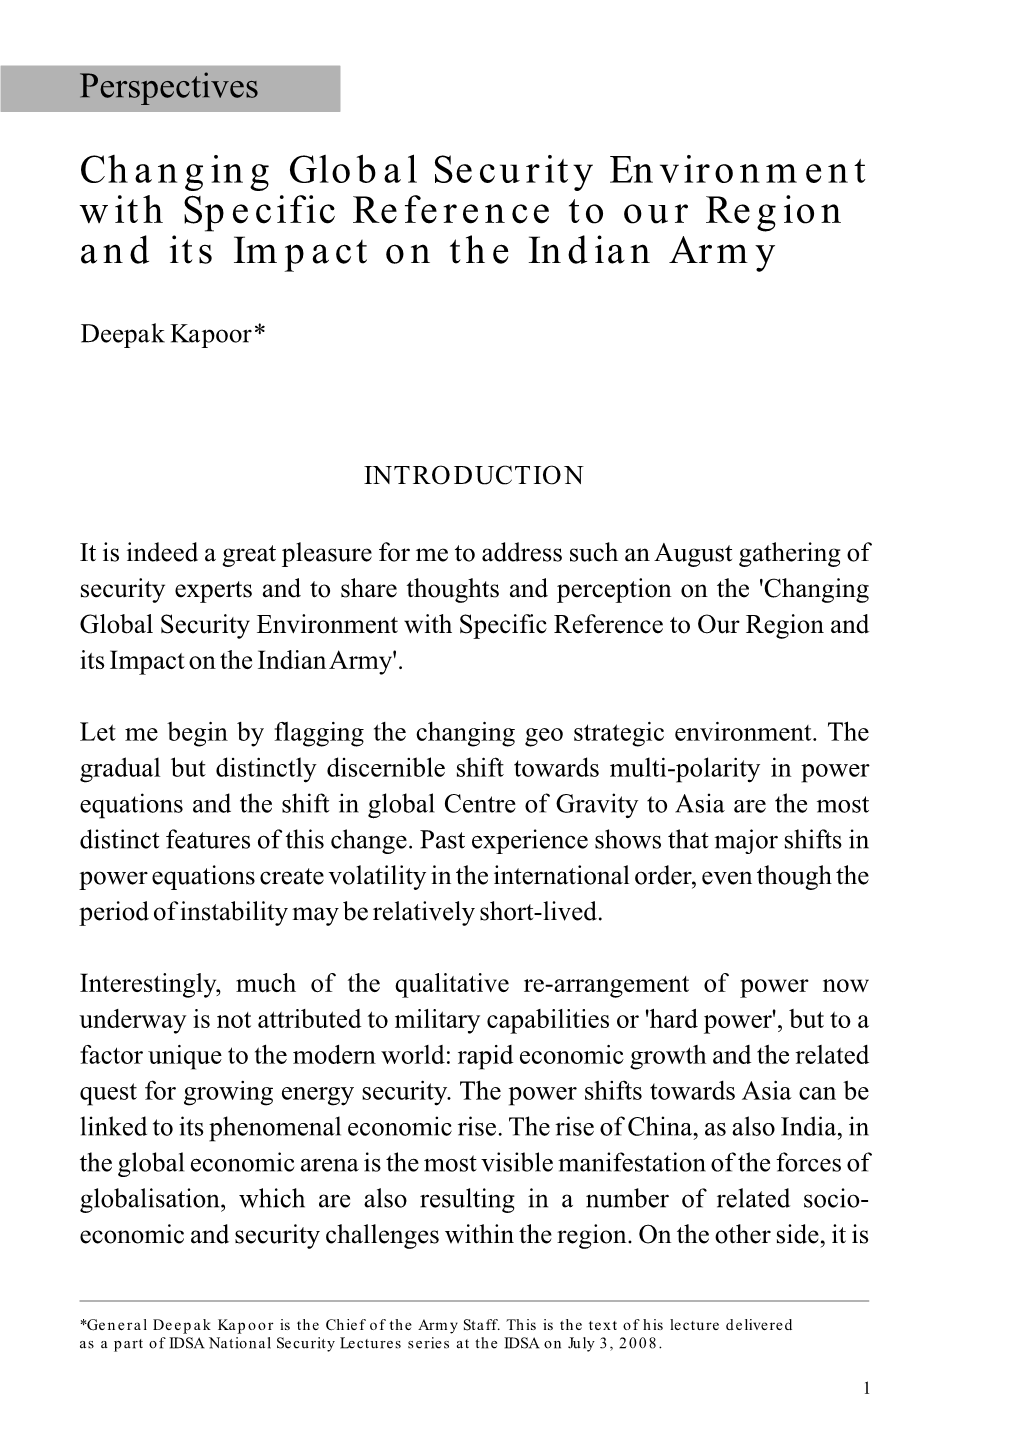 Changing Global Security Environment with Specific Reference to Our Region and Its Impact on the Indian Army